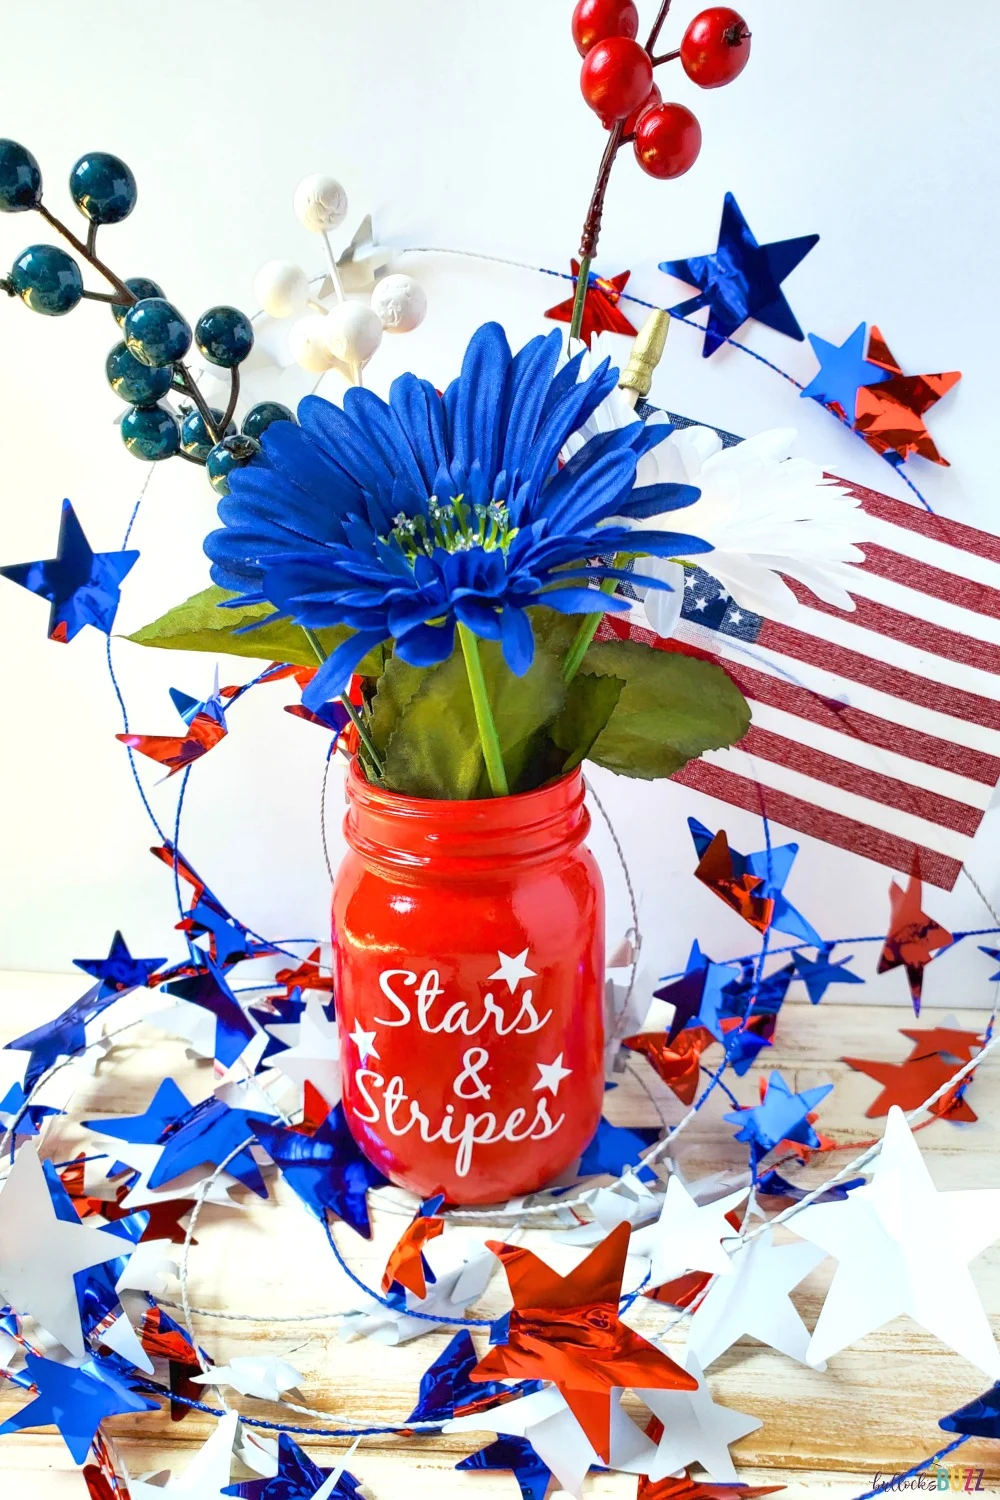 Your area will be transformed by this simple DIY Patriotic Mason Jar Centerpiece! This mason jar craft will add fun and festivity to your Fourth of July celebration! #crafts #patrioticcrafts